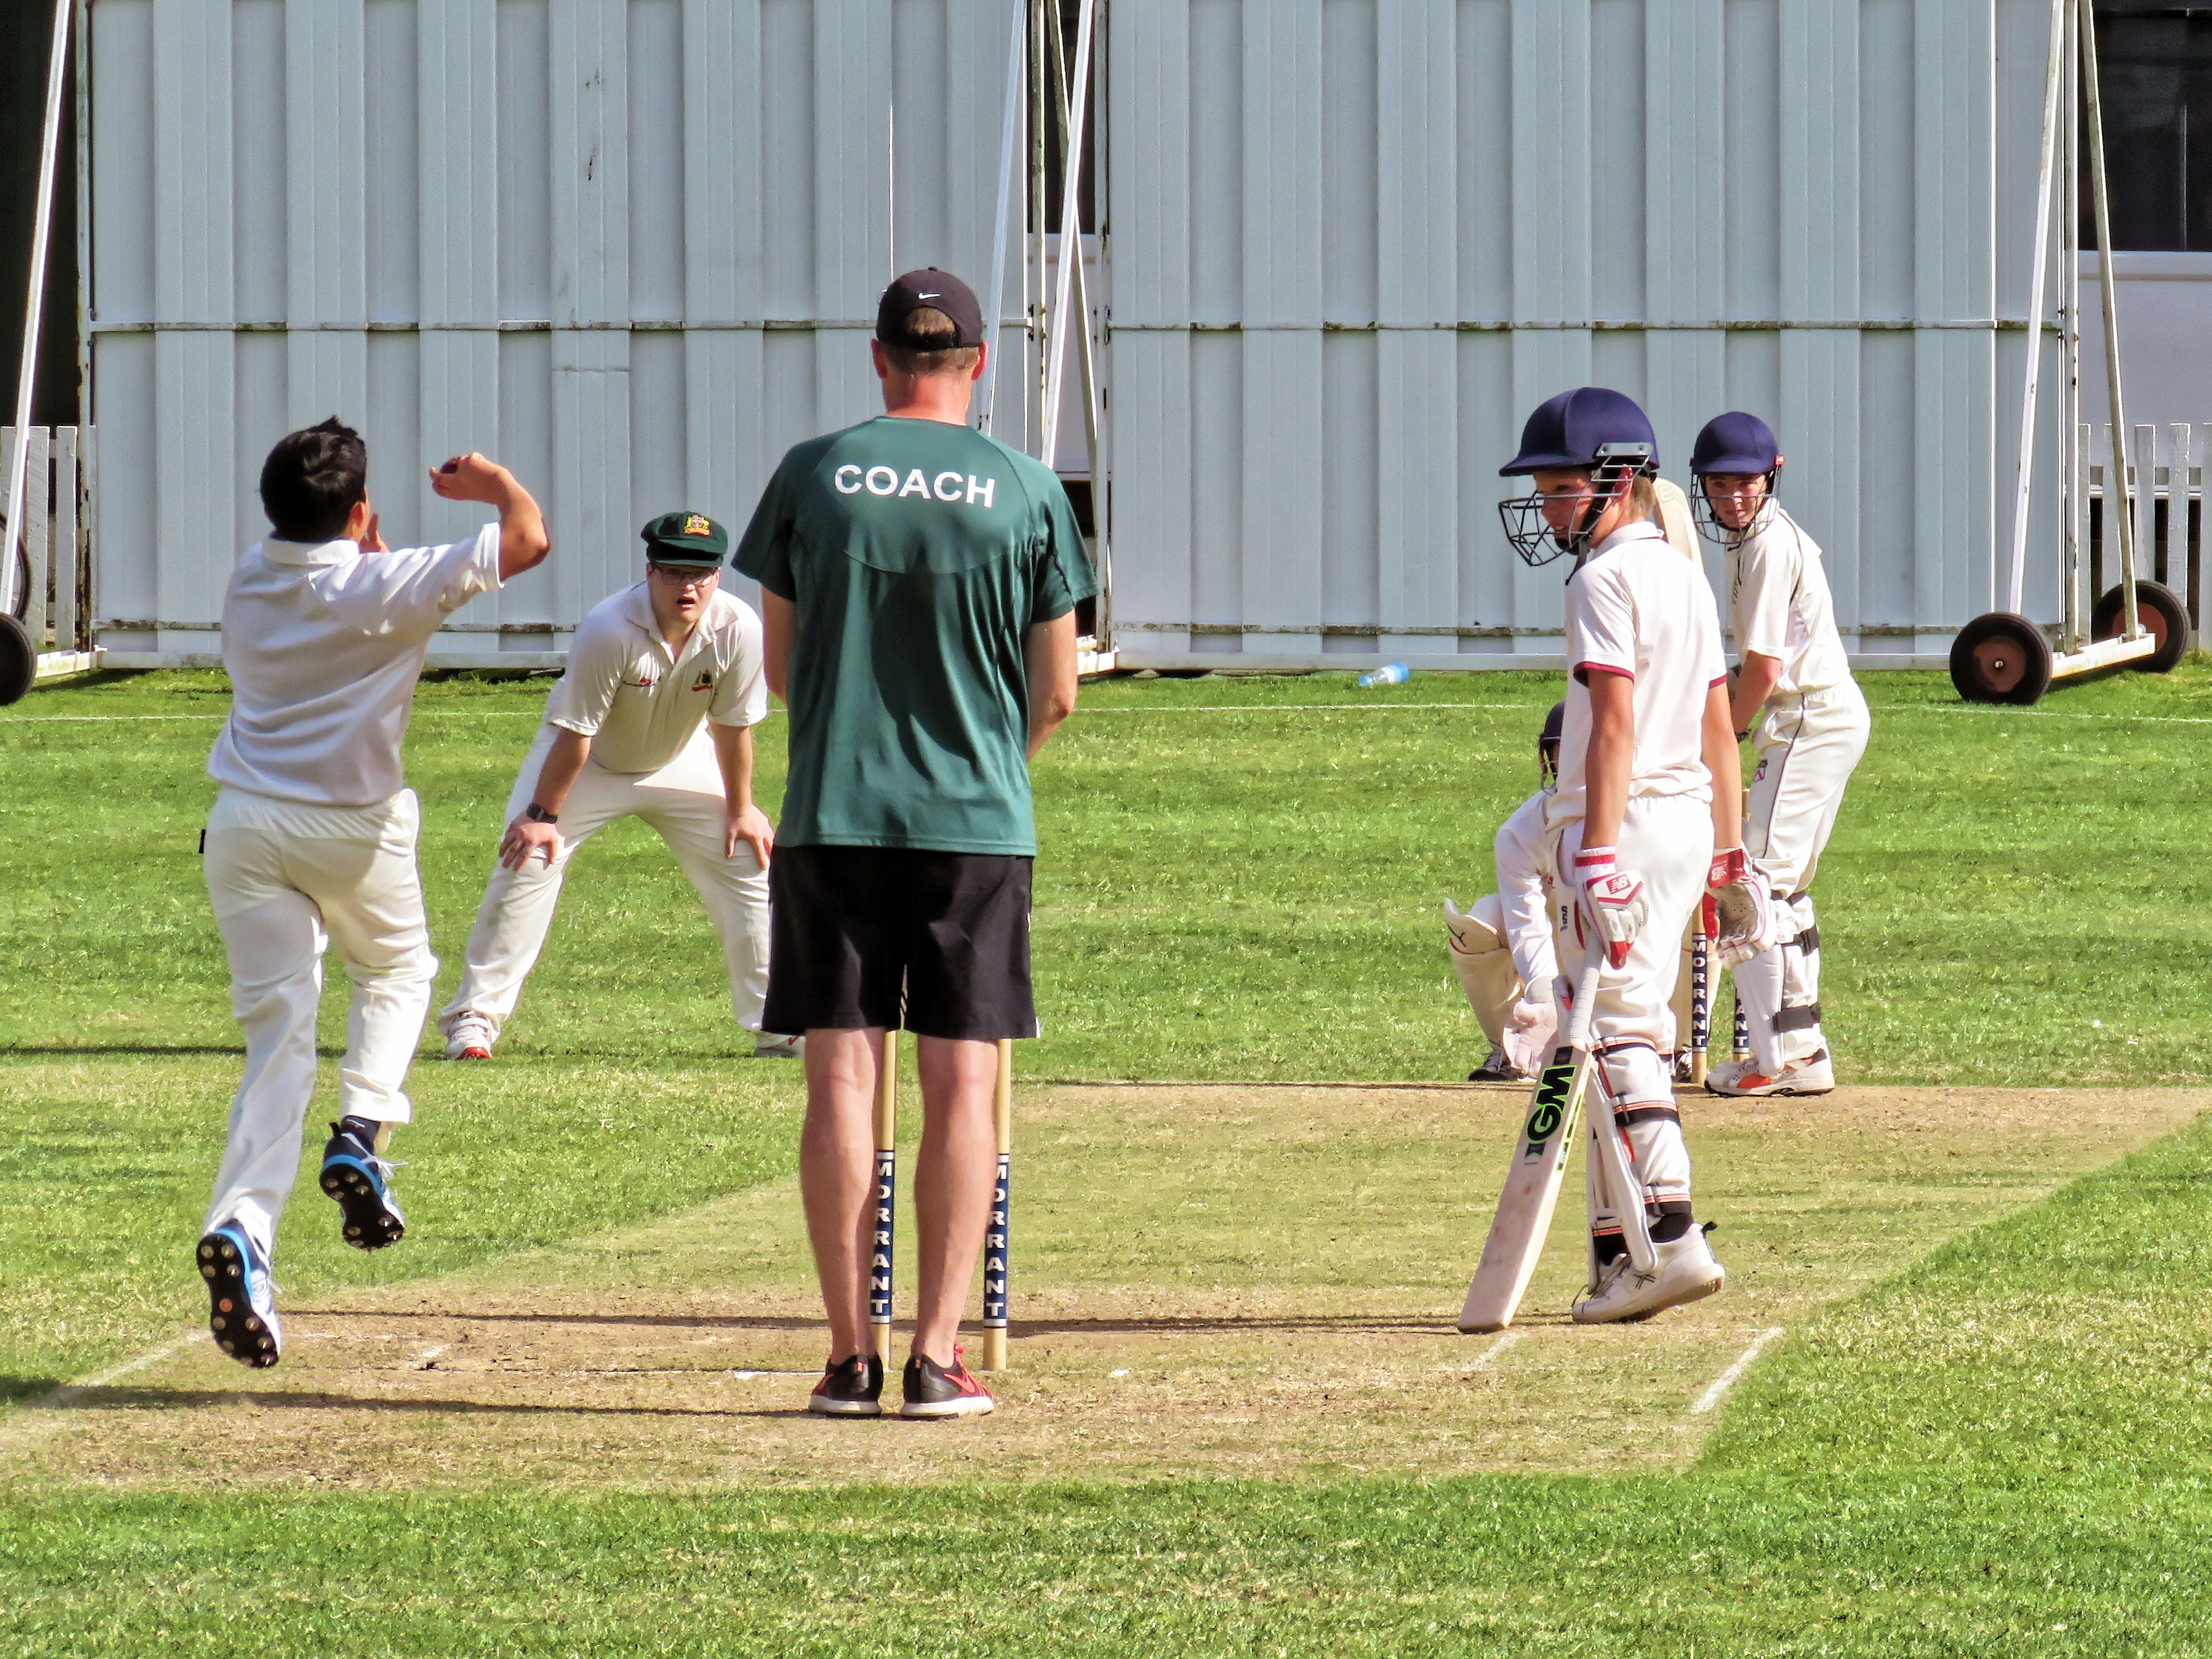 CRICKET FROM THE NORTH: July 2019